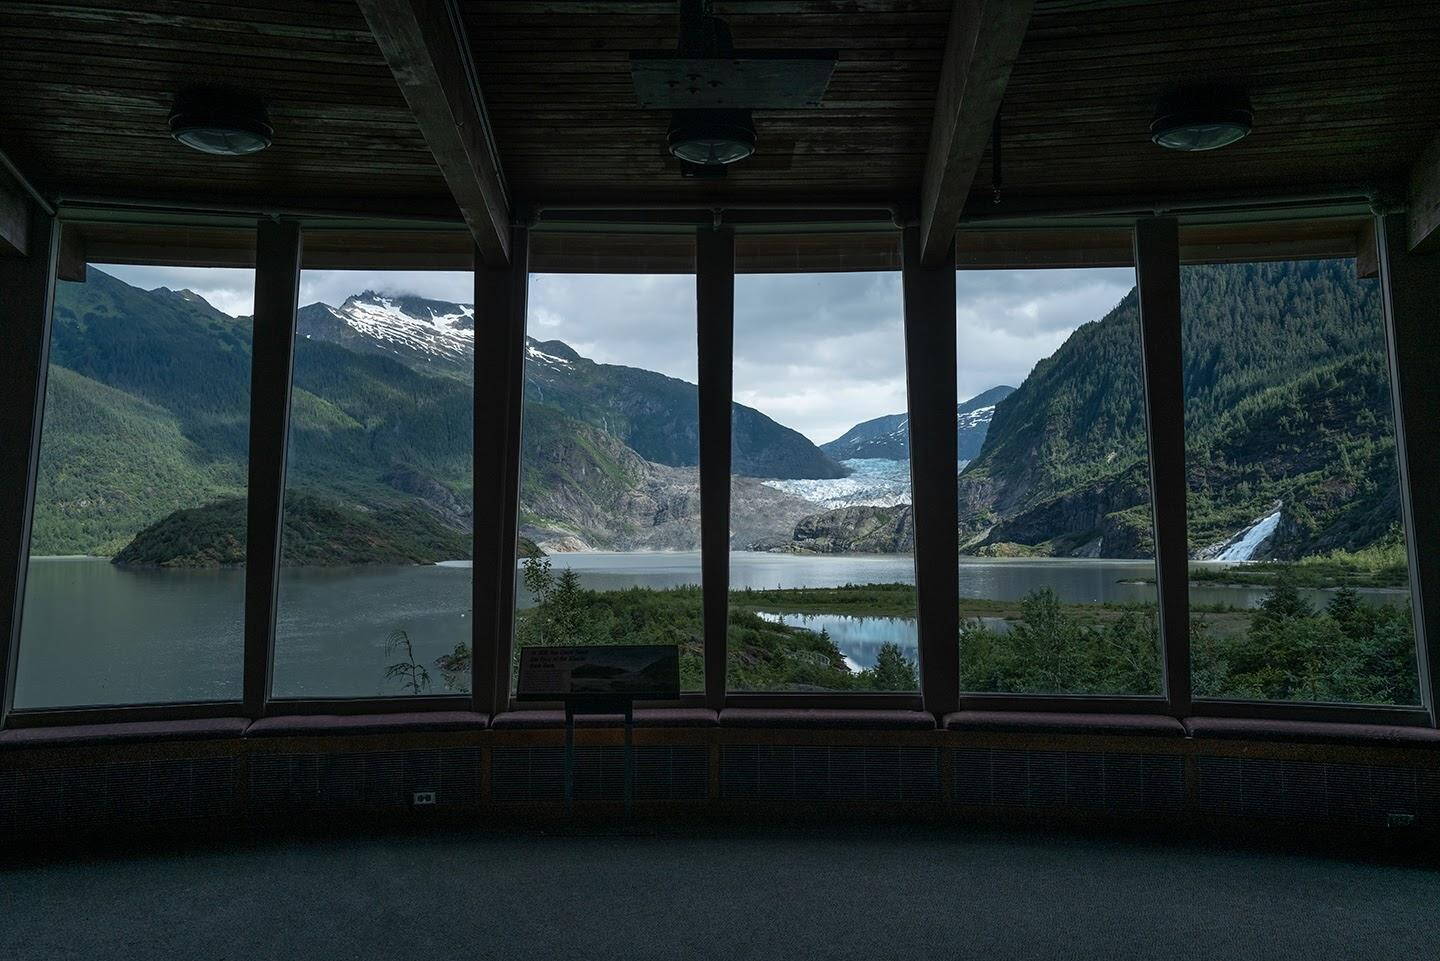 Source: Amber Chapin, Michael Penn 
An artistic rendering of the Mendenhall Glacier Visitor Center in 2040 shows the glacier “will barely be visible” by 2050 based on a mid-range thinning rate scenario, according to a Juneau-specific climate change study published Monday.